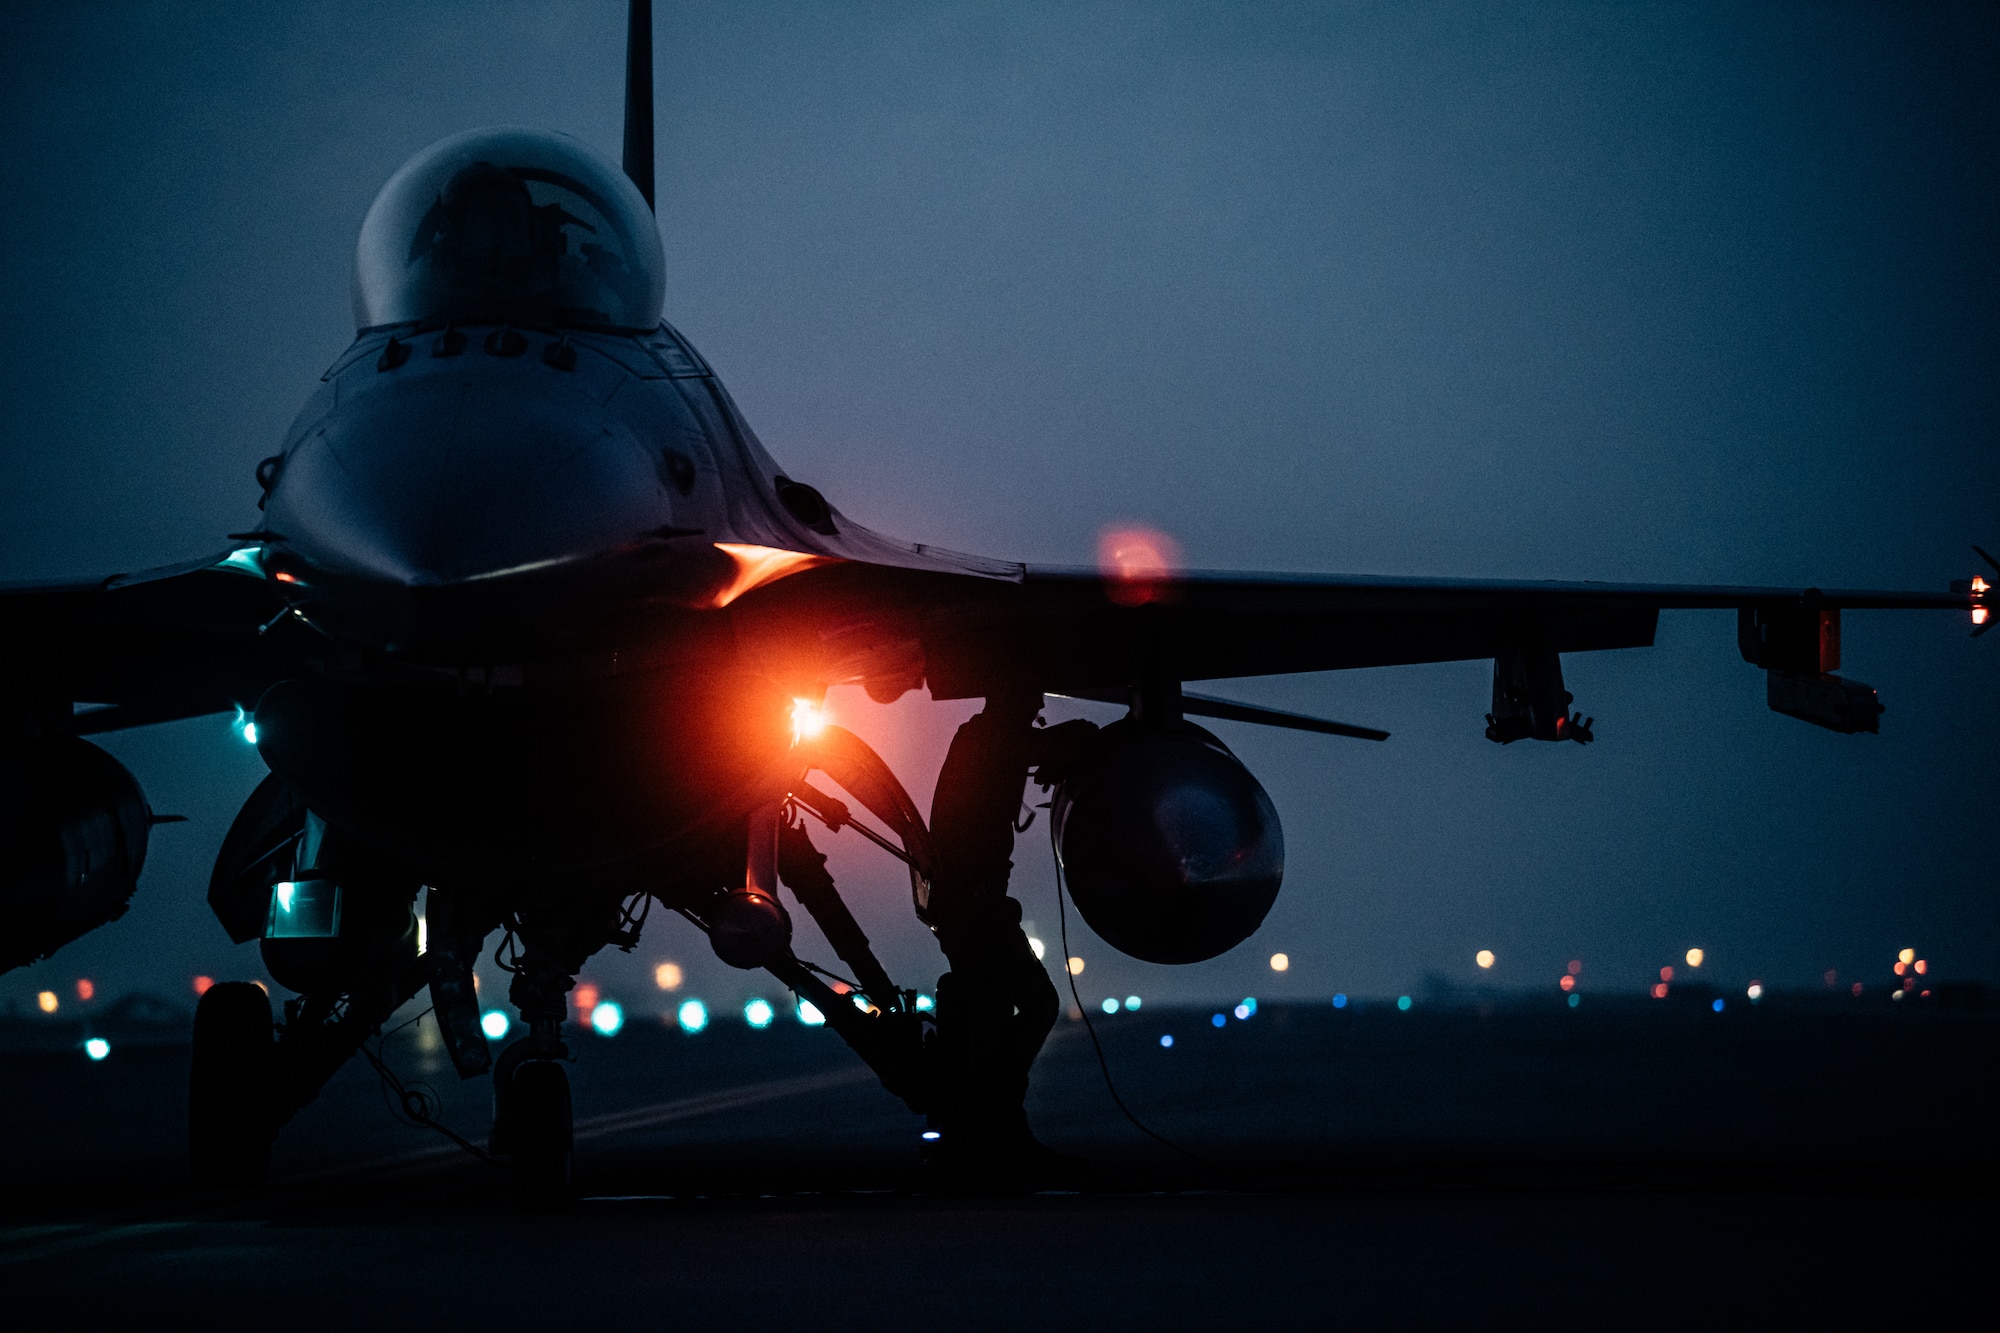 A U.S. Air Force F-16 Fighting Falcon aircraft assigned to the 77th Expeditionary Fighter Squadron at Prince Sultan Air Base, Kingdom of Saudi Arabia, undergoes a hot refueling operation performed by Airmen with the 379th Expeditionary Maintenance Group and 379th Expeditionary Logistics Readiness Squadron at Al Udeid Air Base, Qatar, Mar. 1, 2021. F-16s received fuel with their engines still running in order to rapidly redeploy back into U.S. Central Command’s area of responsibility during an Air Forces Central Agile Combat Employment capstone event. The capstone event enhanced theater ACE competencies, validating operational capabilities and command and control while simultaneously strengthening joint and regional partnerships.